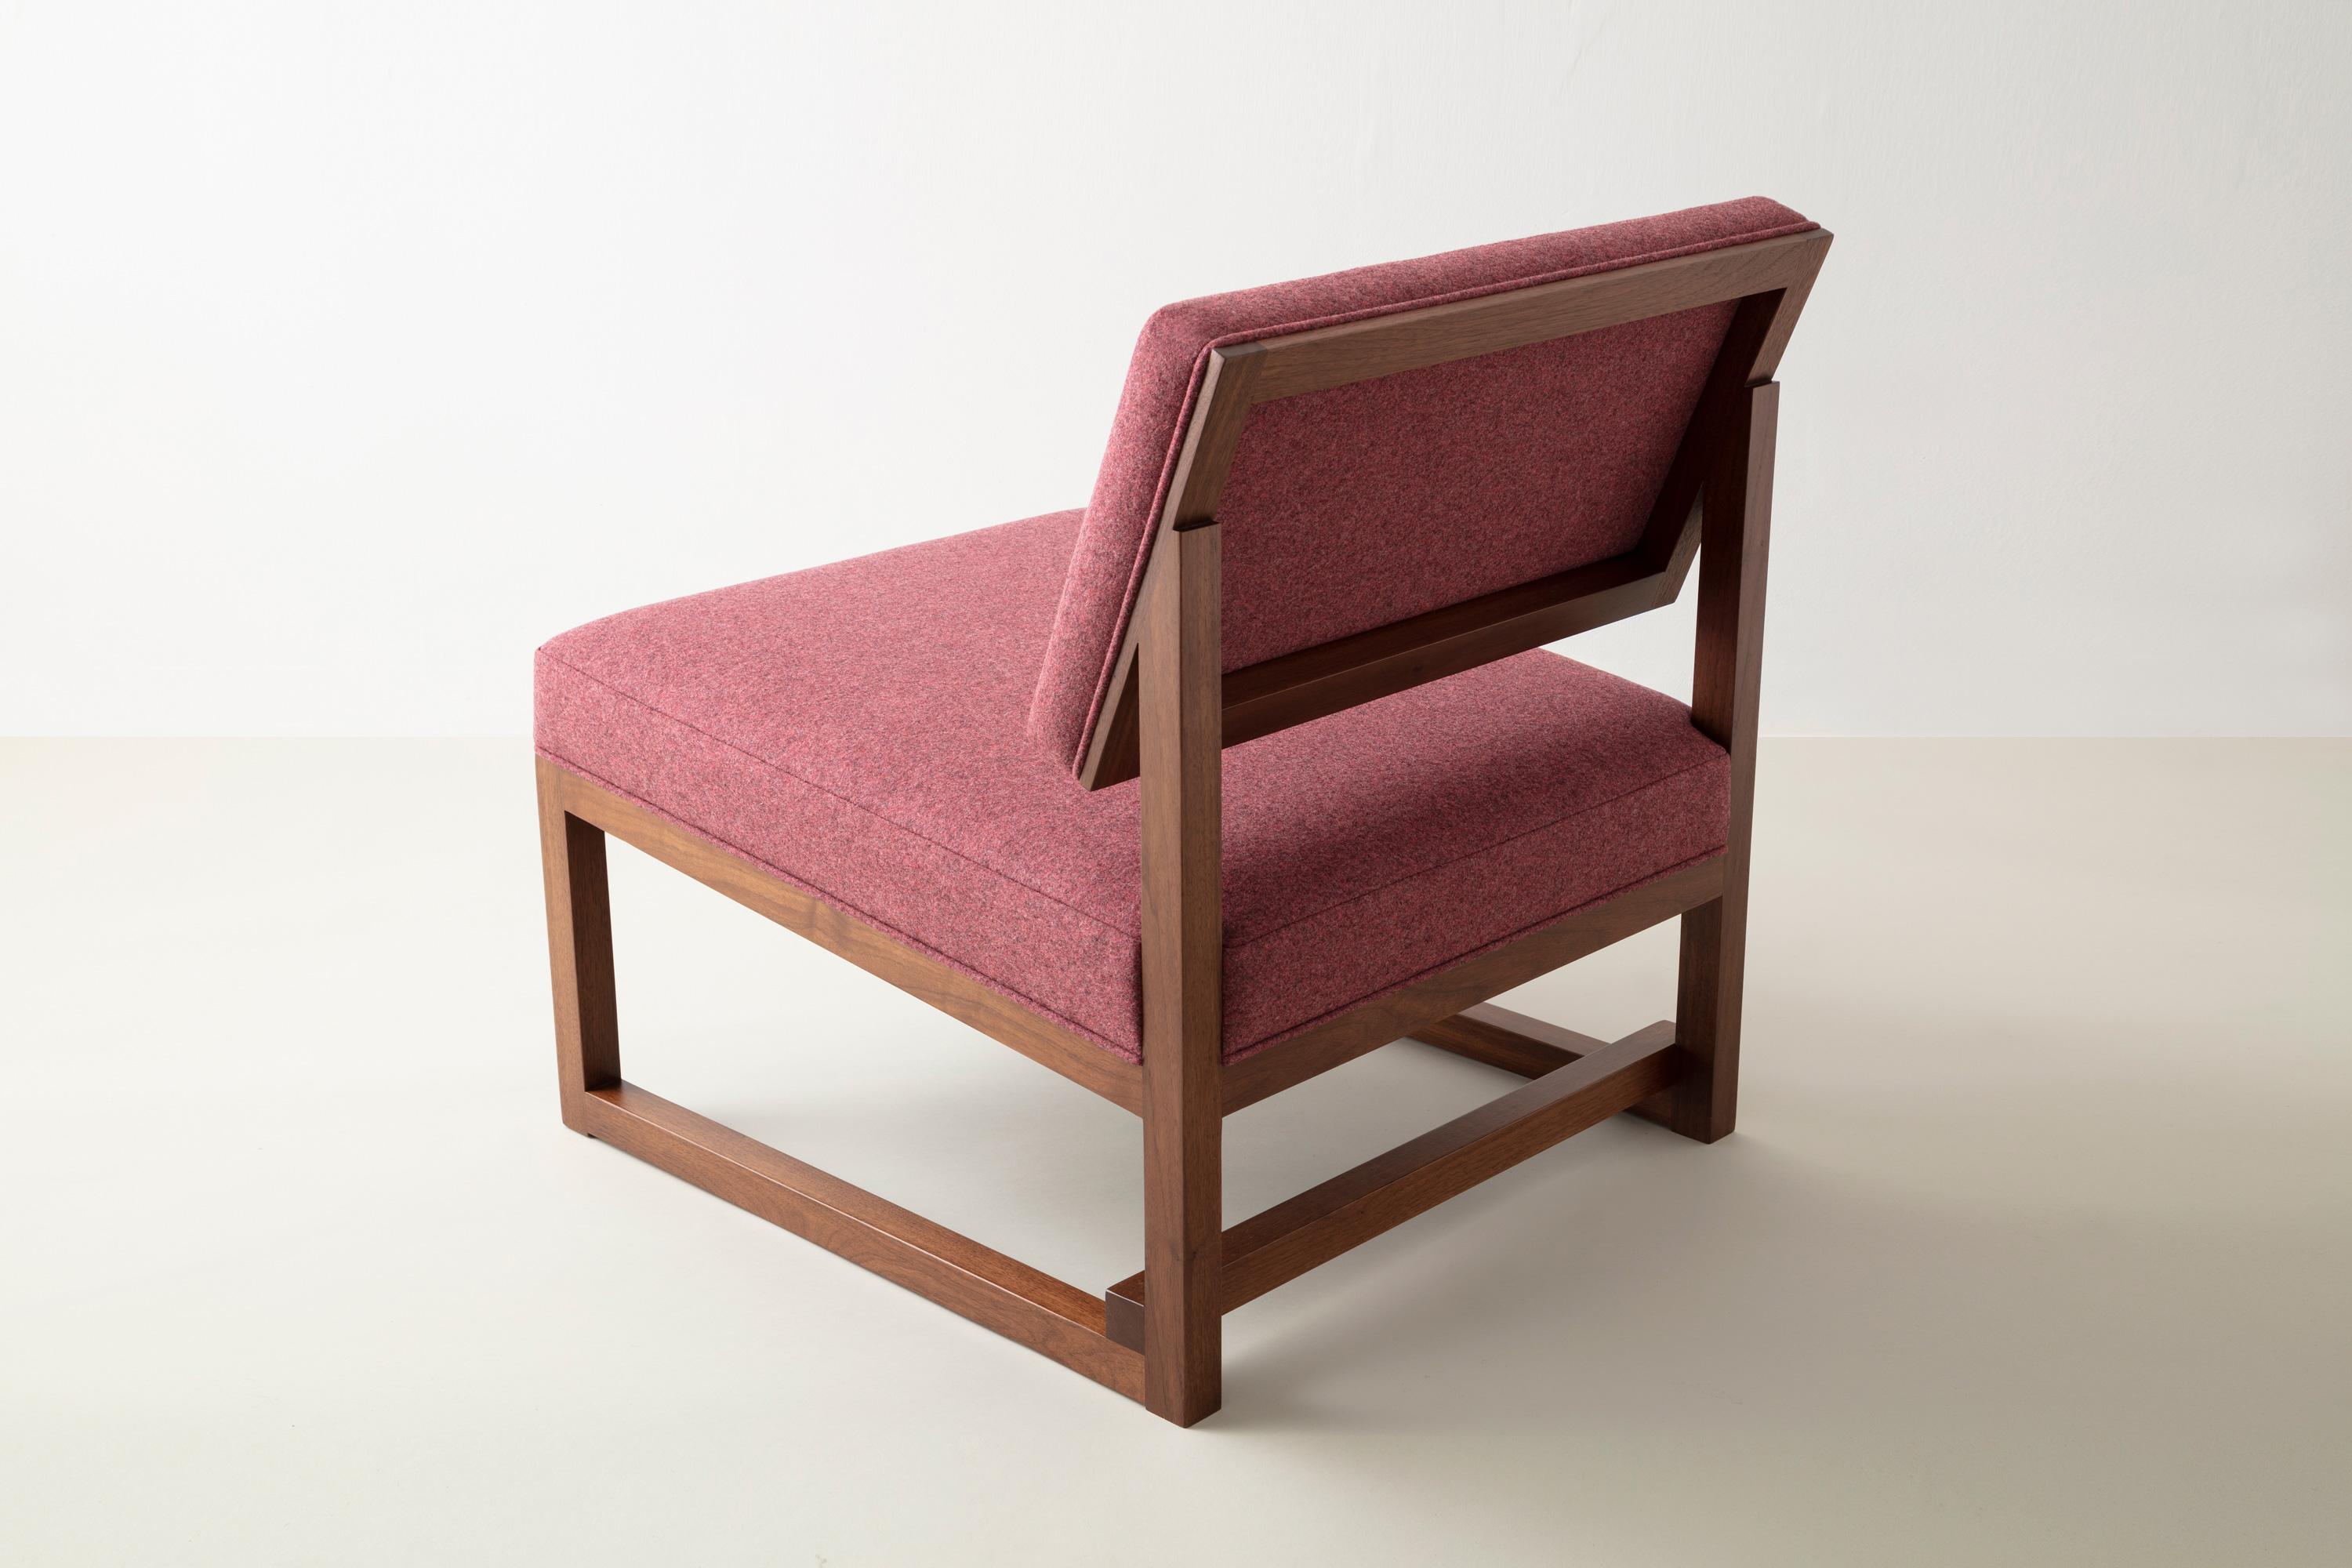 American SQ Lounge Chair in Walnut, Upholstery in Wool, Bouclé or COM, Handmade in USA